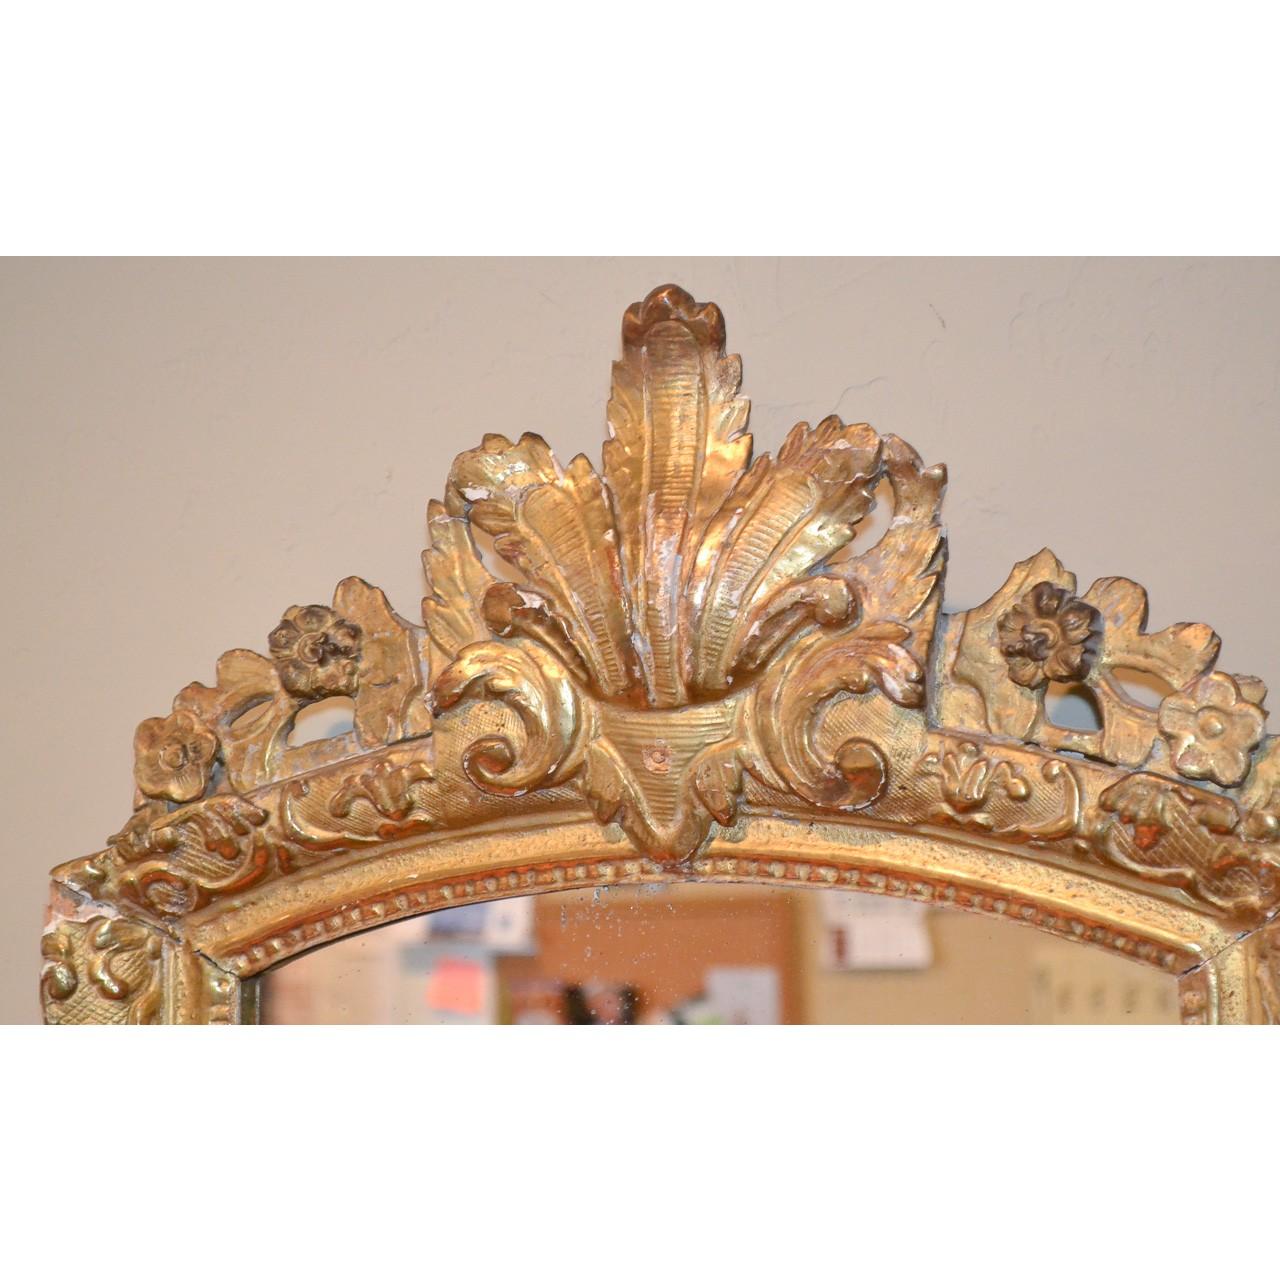 Finely carved late 18th century French Regence style giltwood wall or console mirror. The shaped crest features a large hand-carved leaf-spray and trailing flower vines. The border carved in the round and in relief with stylized foliate designs. The